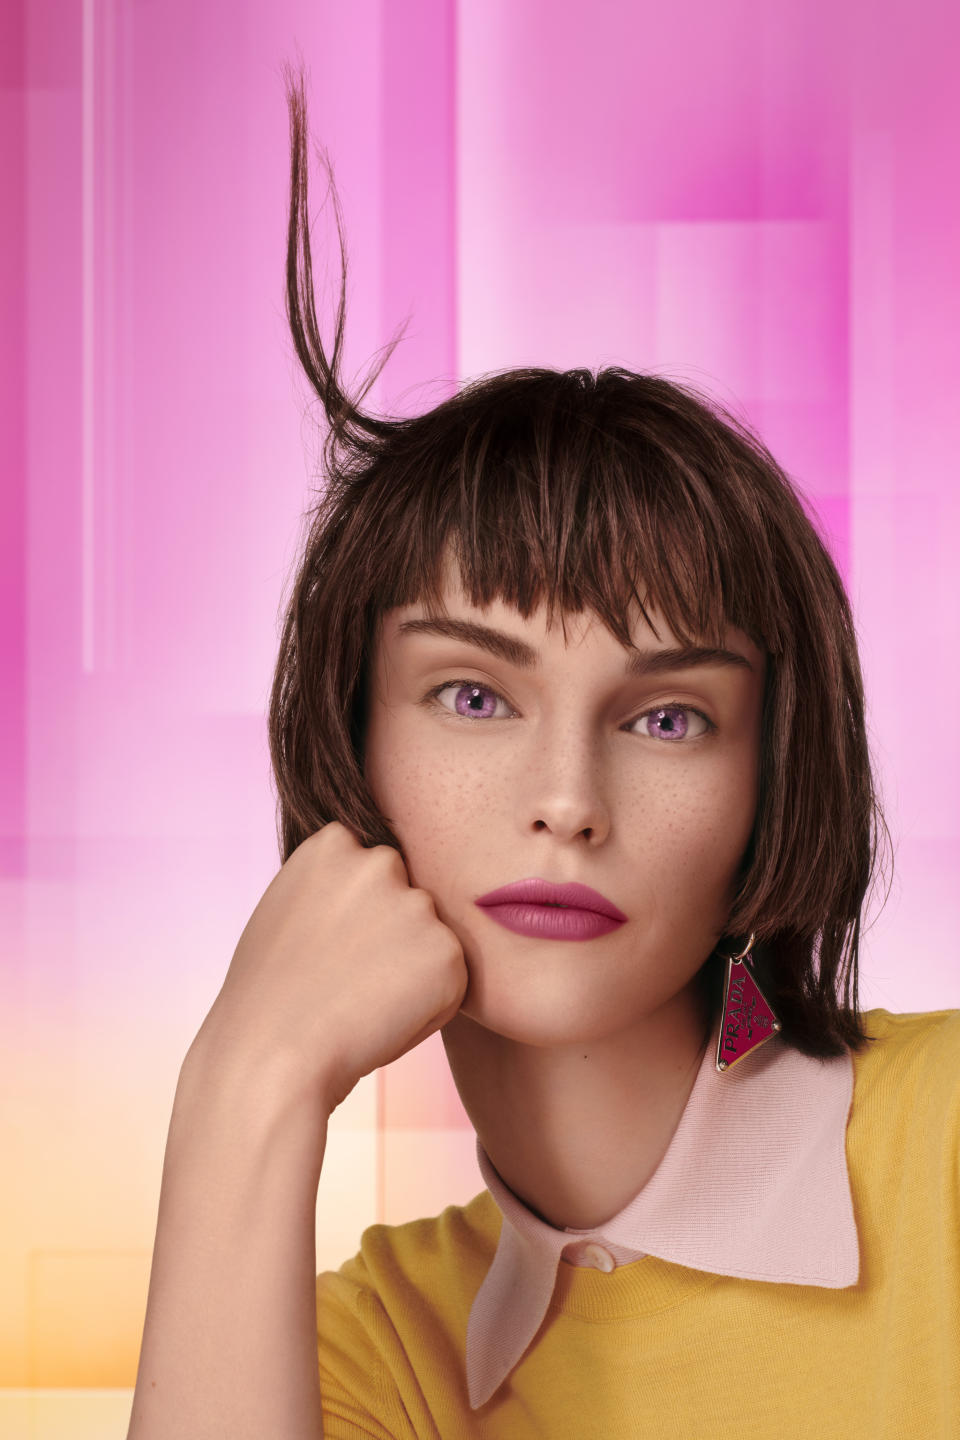 The Candy virtual muse fronting the Prada Candy new campaign. - Credit: Courtesy of Prada